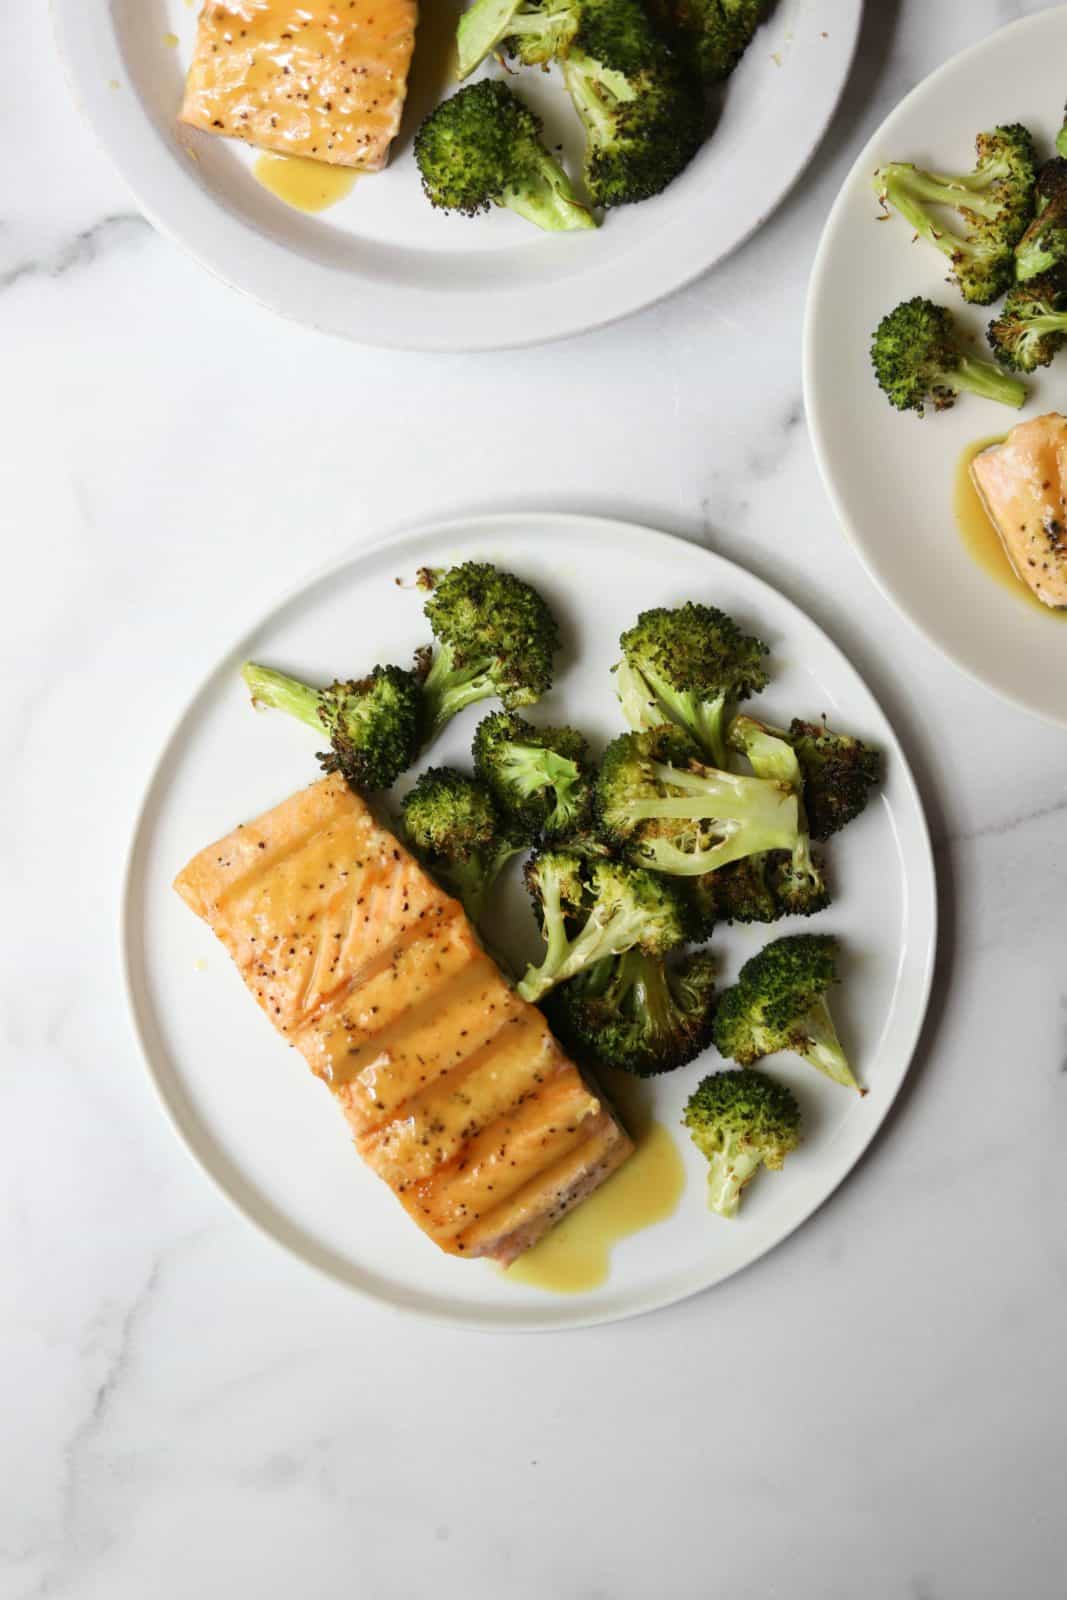 Maple salmon and broccoli on white plates